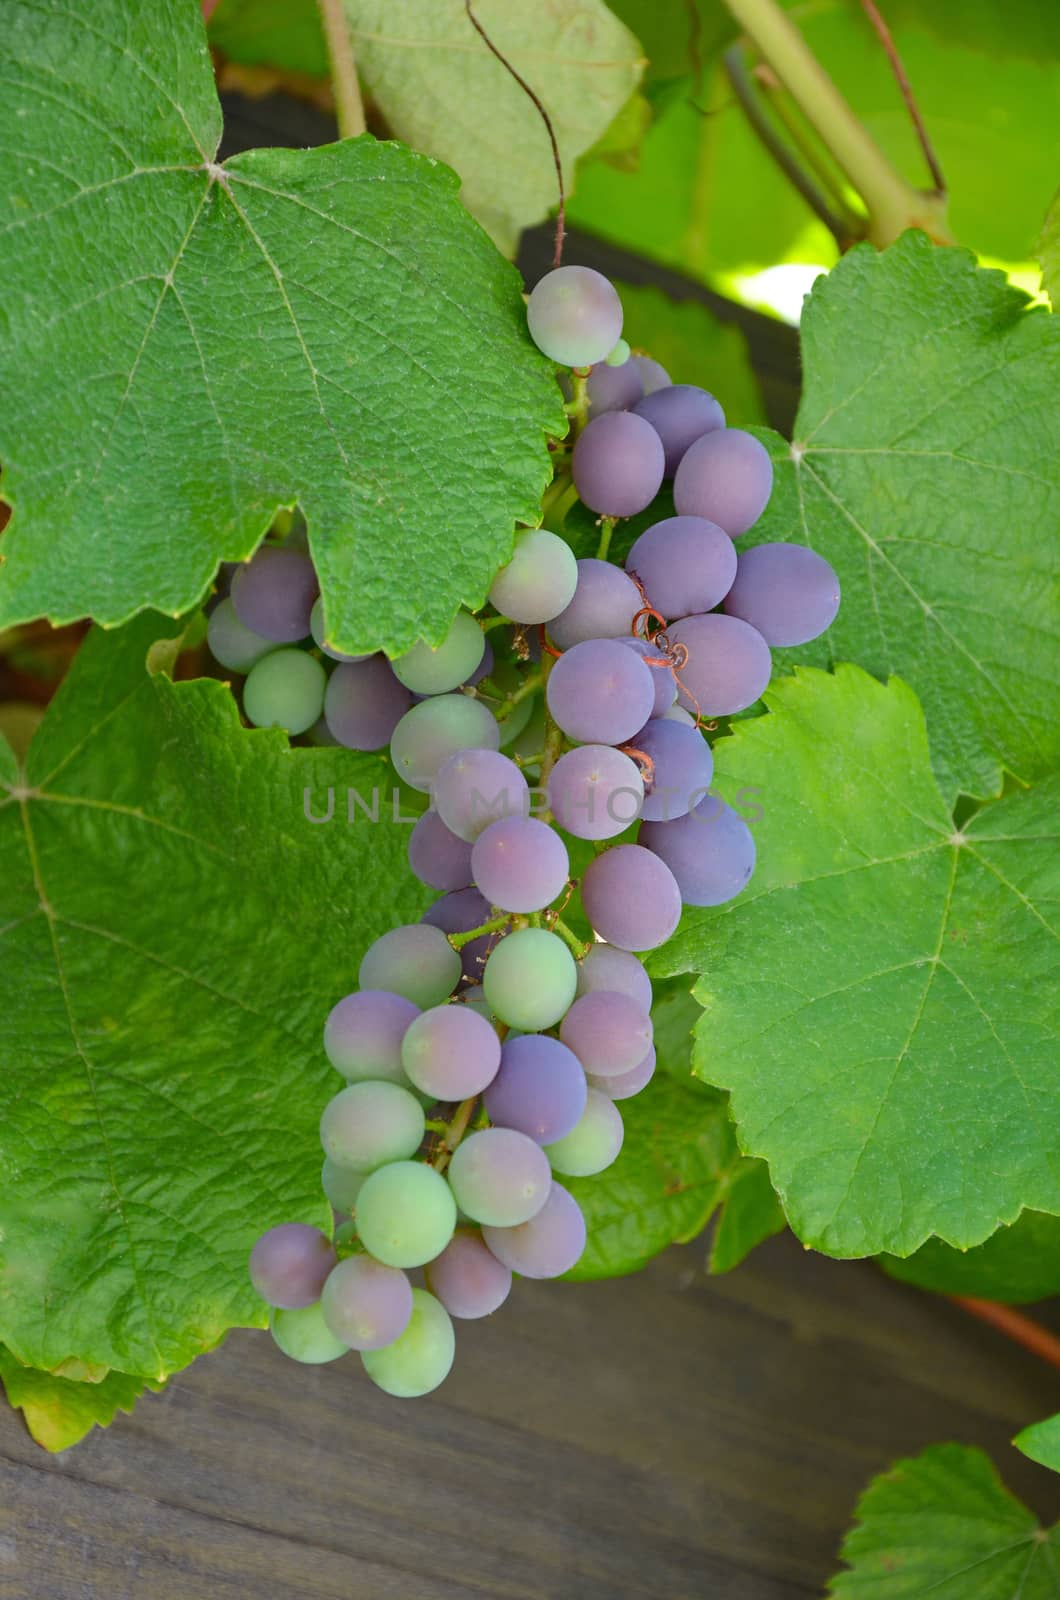 Concord grapes by ingperl